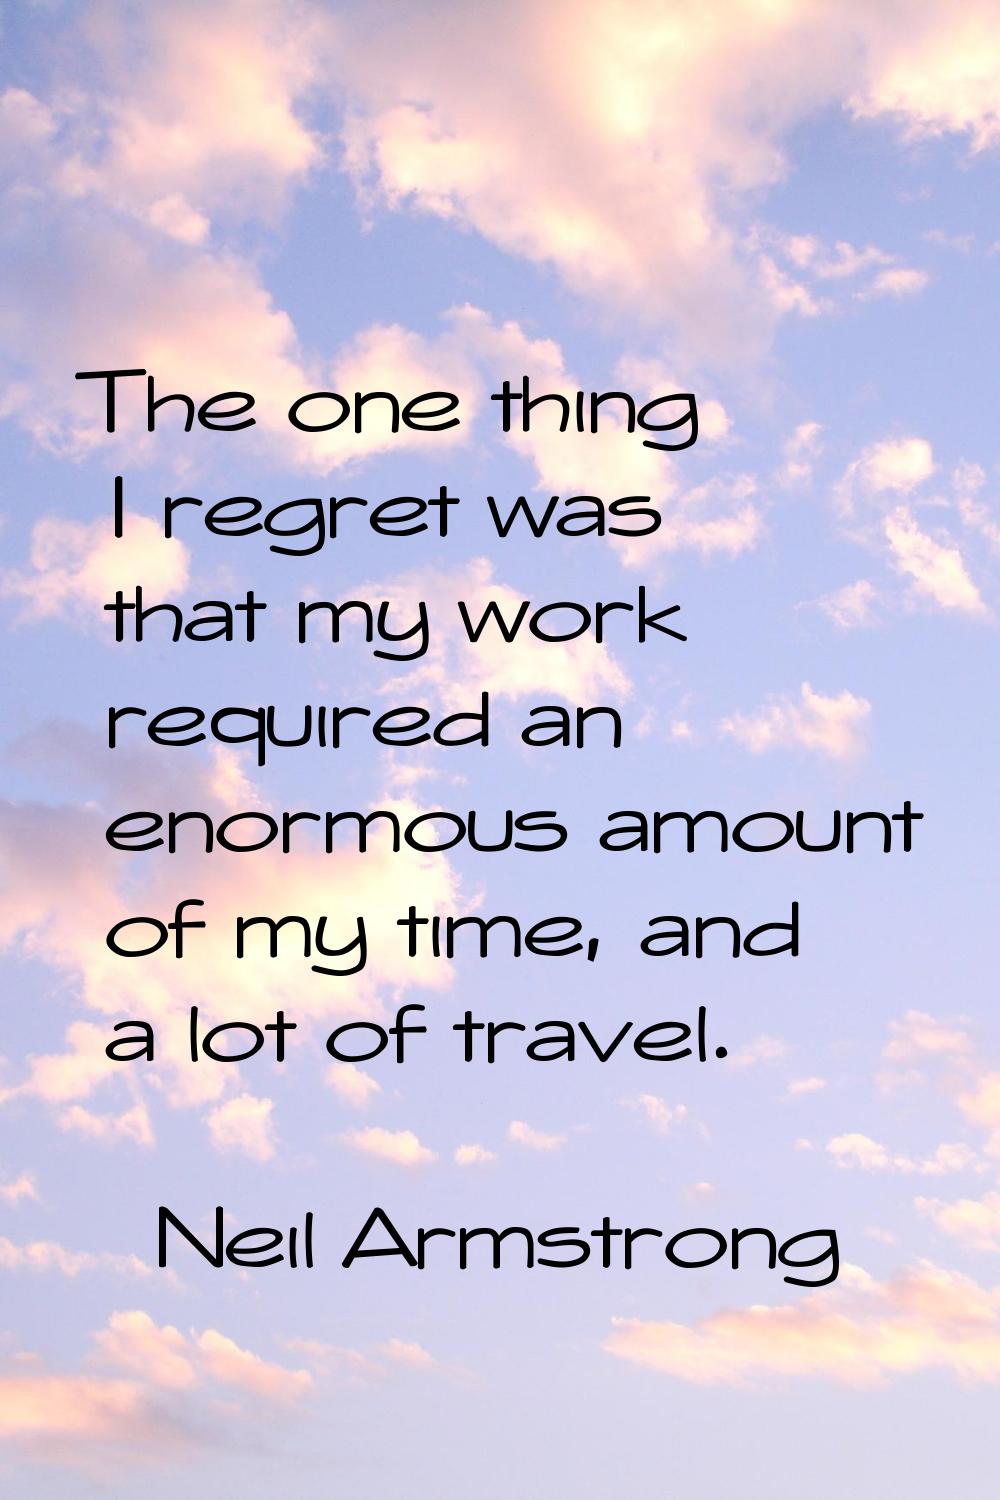 The one thing I regret was that my work required an enormous amount of my time, and a lot of travel